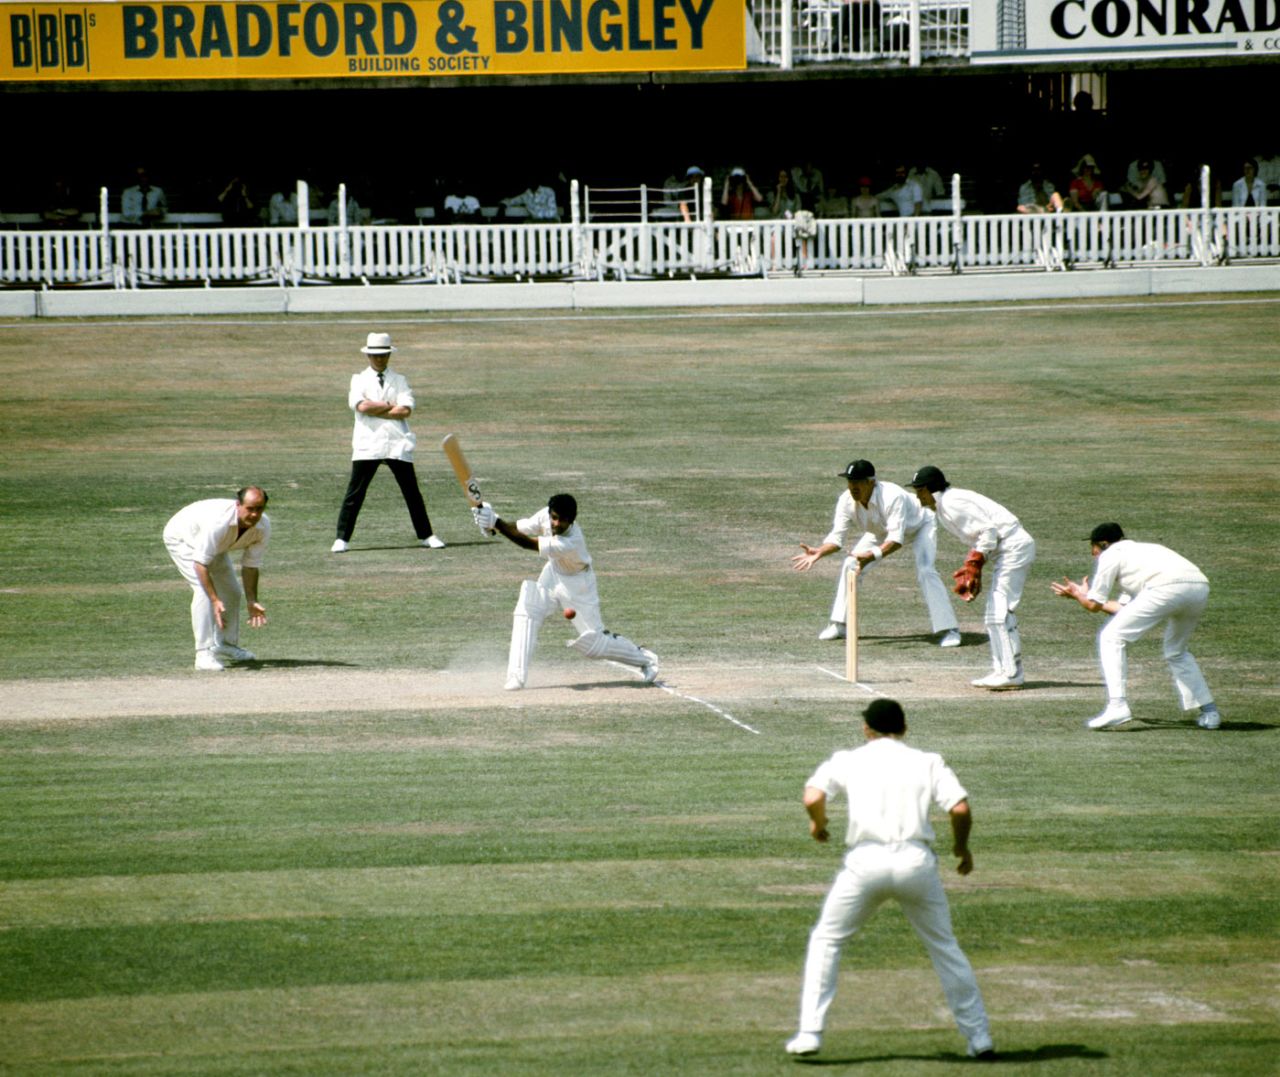 Alvin Kallicharran drives as Brian Close at short leg looks on, England v West Indies, 2nd Test, Lord's, 5th day, June 22, 1976